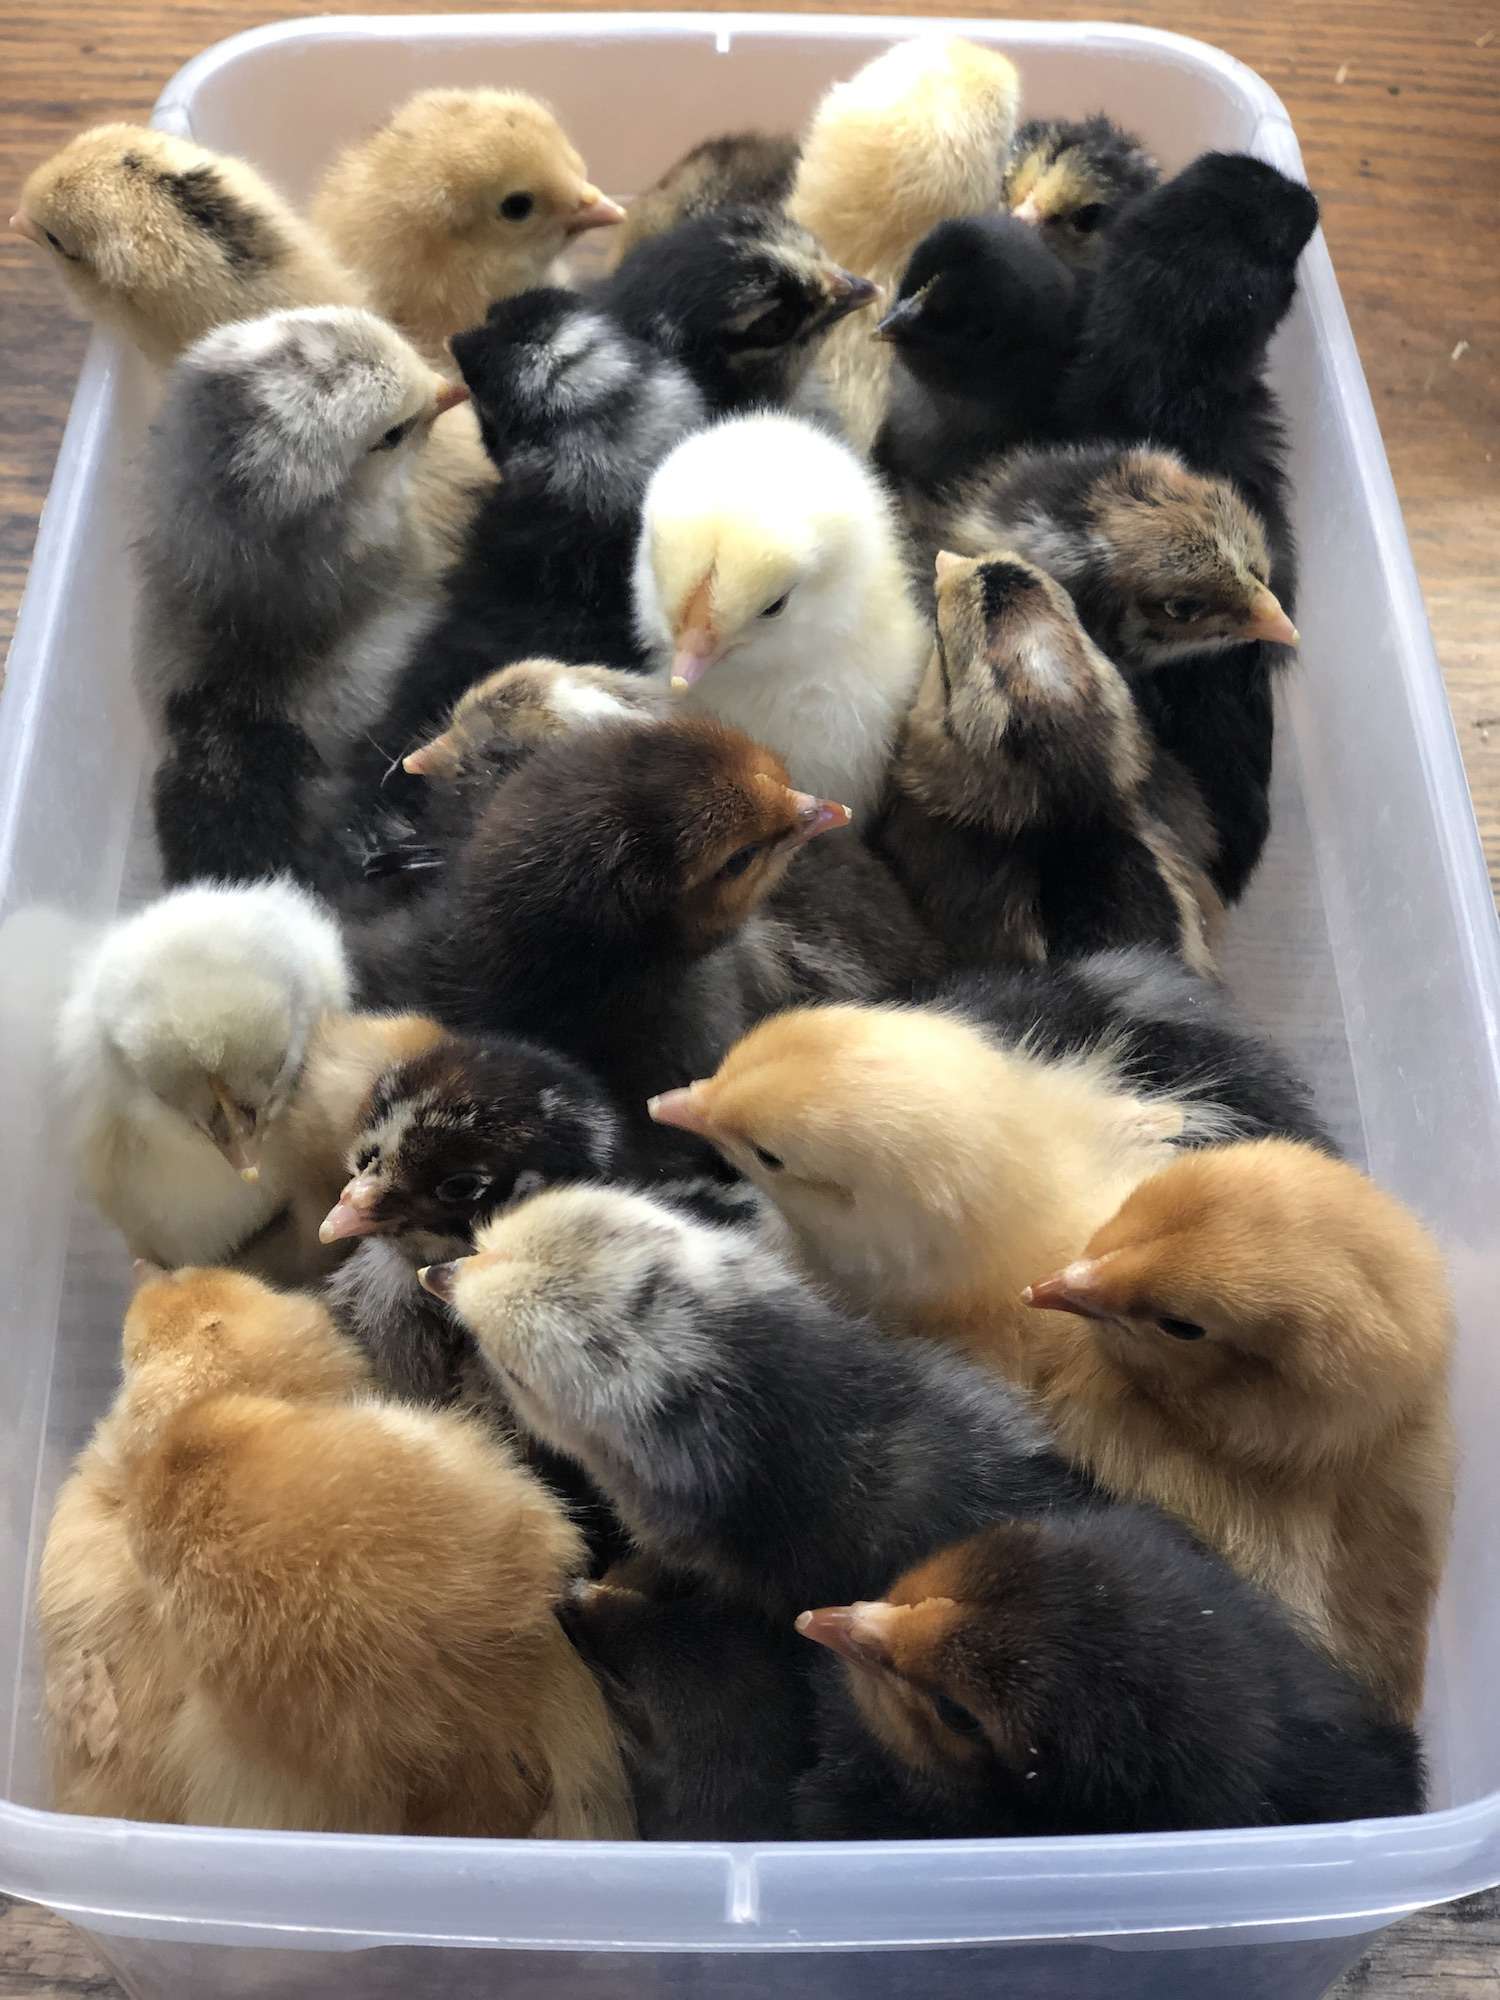 Many different baby chicks in a tupperware container